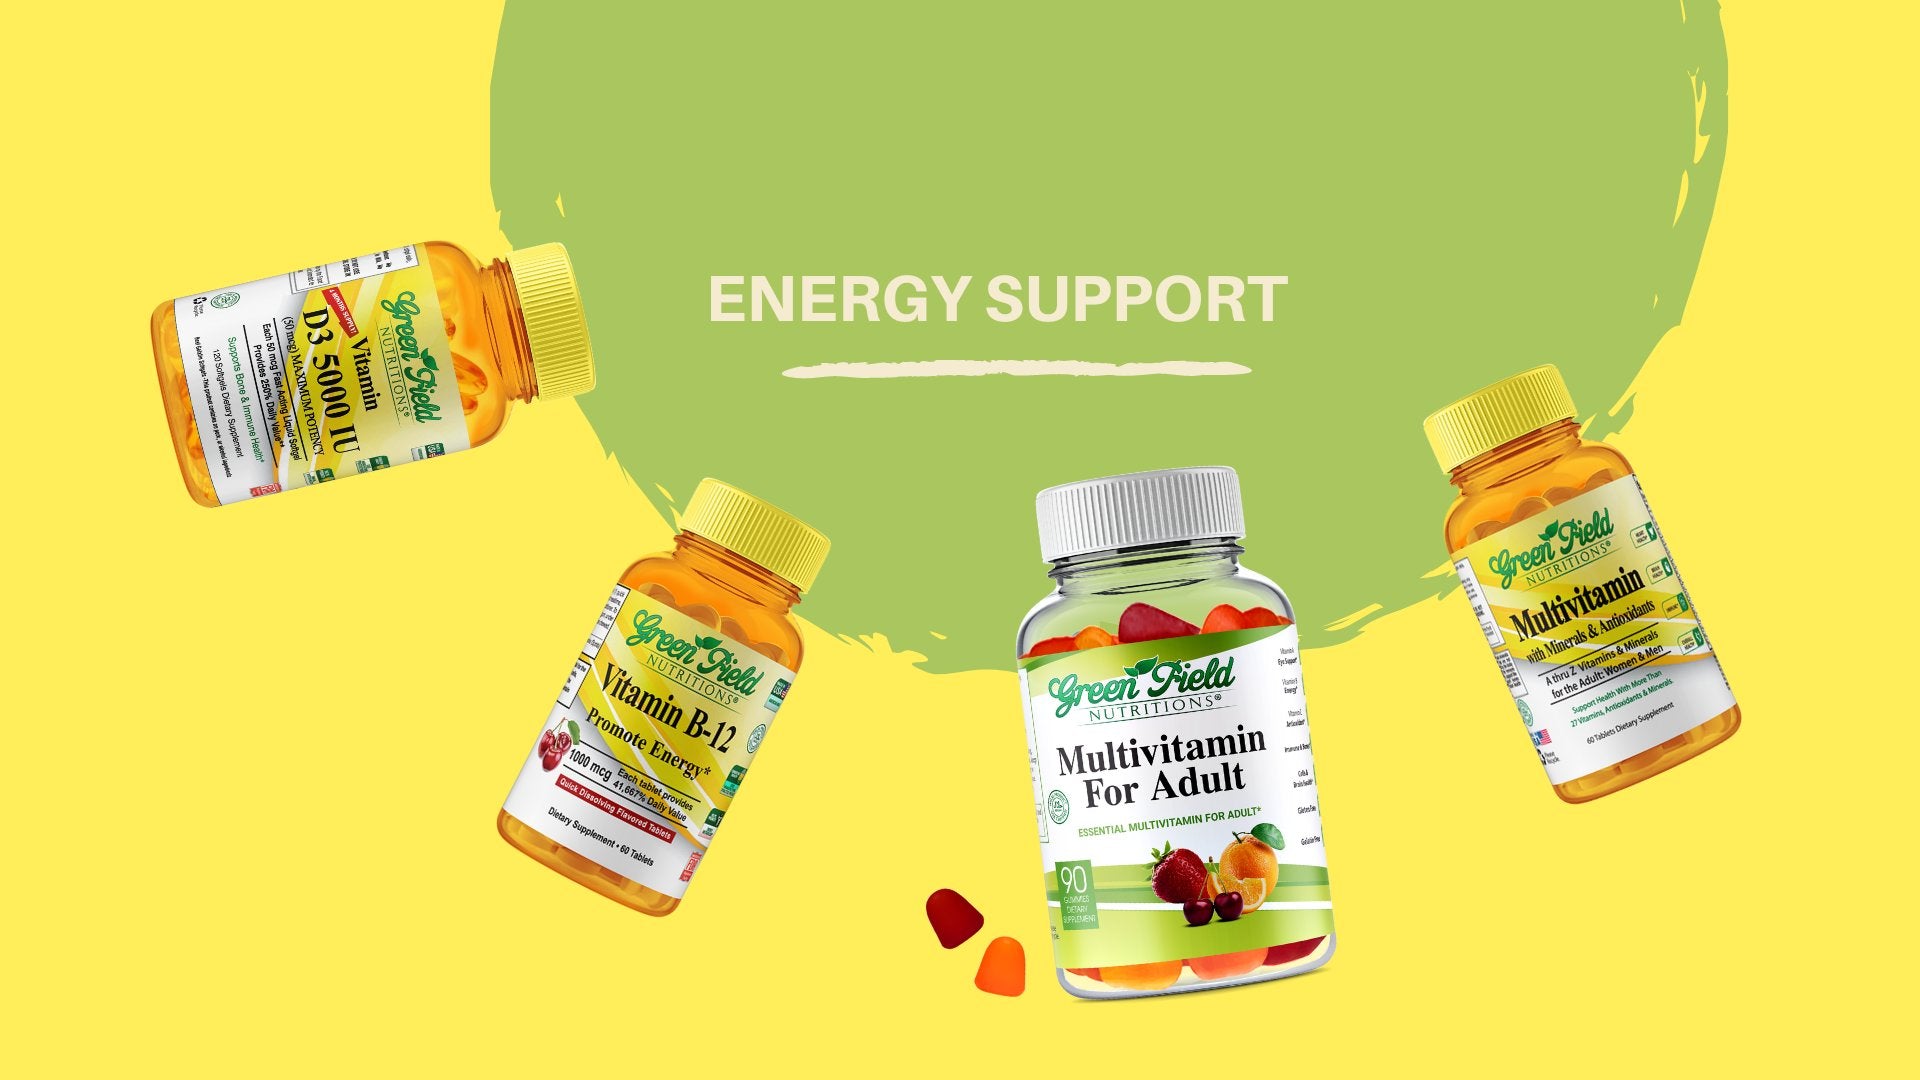 Greenfield Nutritions Halal Vitamins to Support Energy including Halal vitamin B12, Halal multivitamin for Adult, and Halal vitamin D3